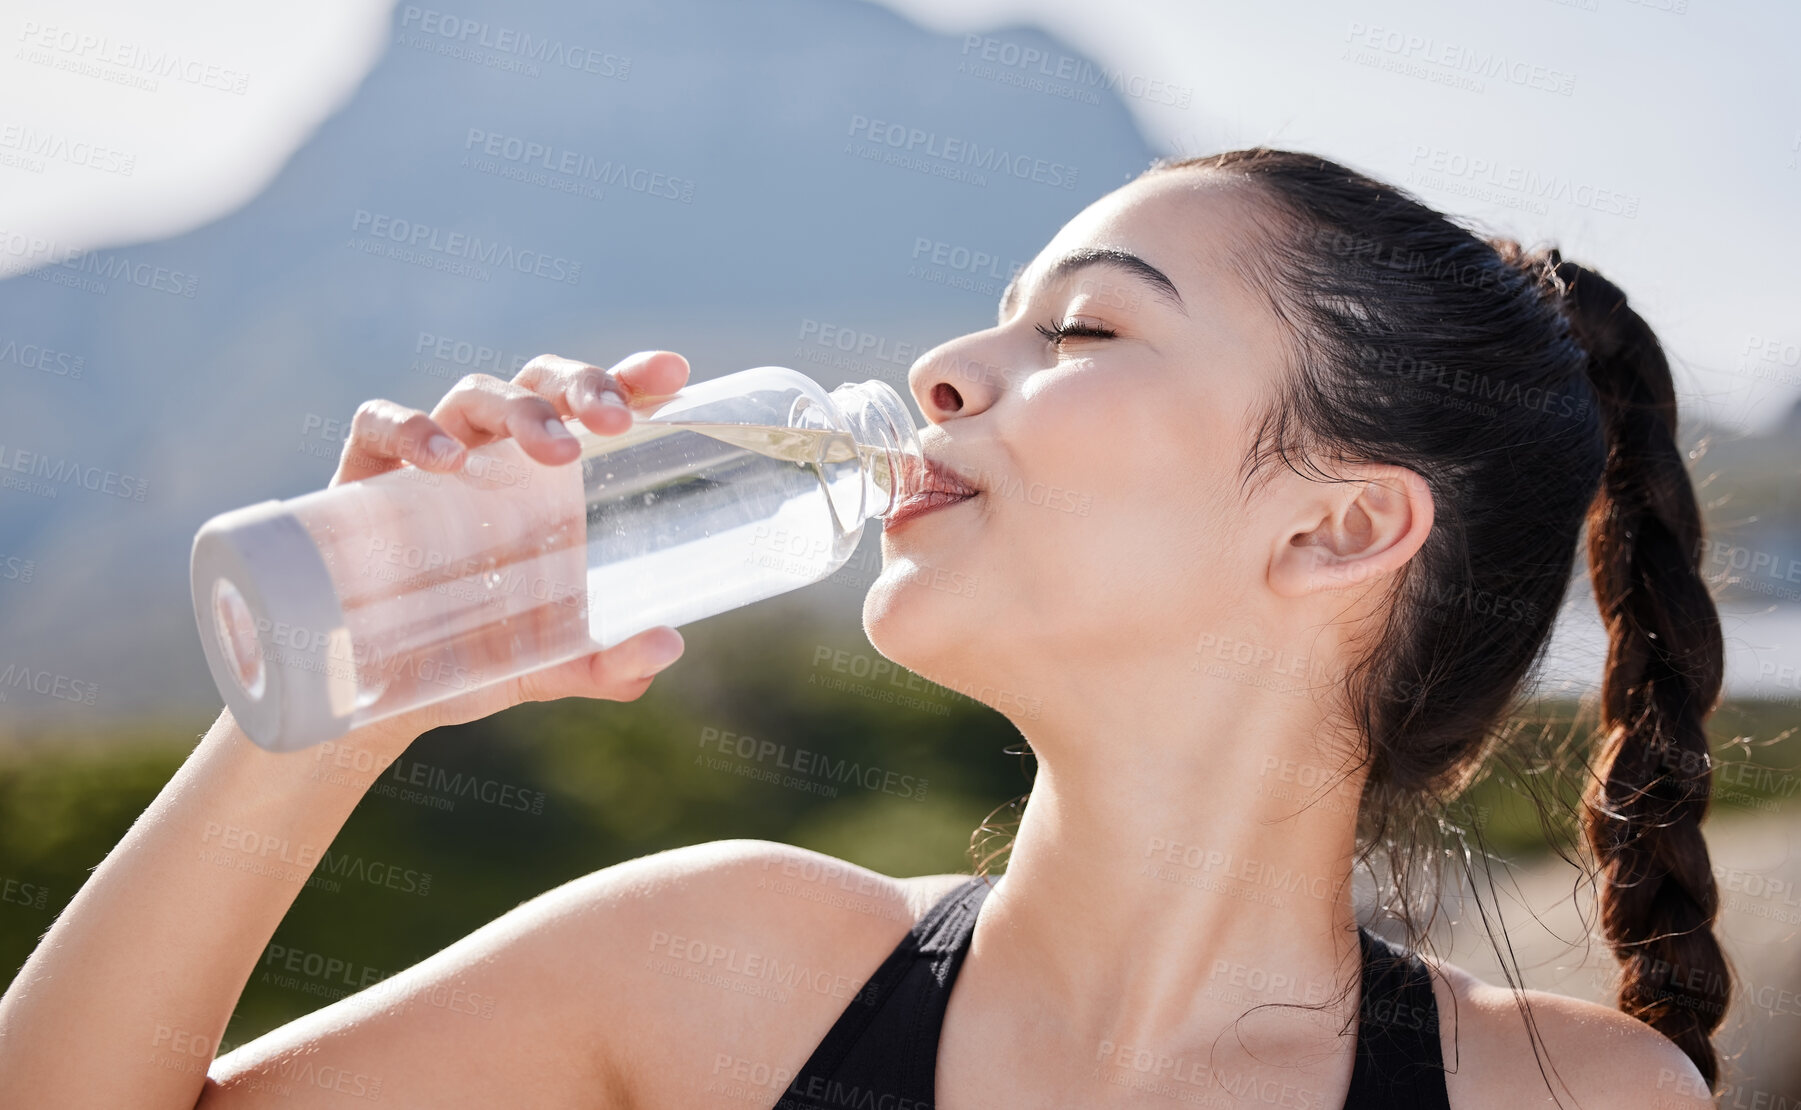 Buy stock photo Shot of a young woman drinking water after working out in nature